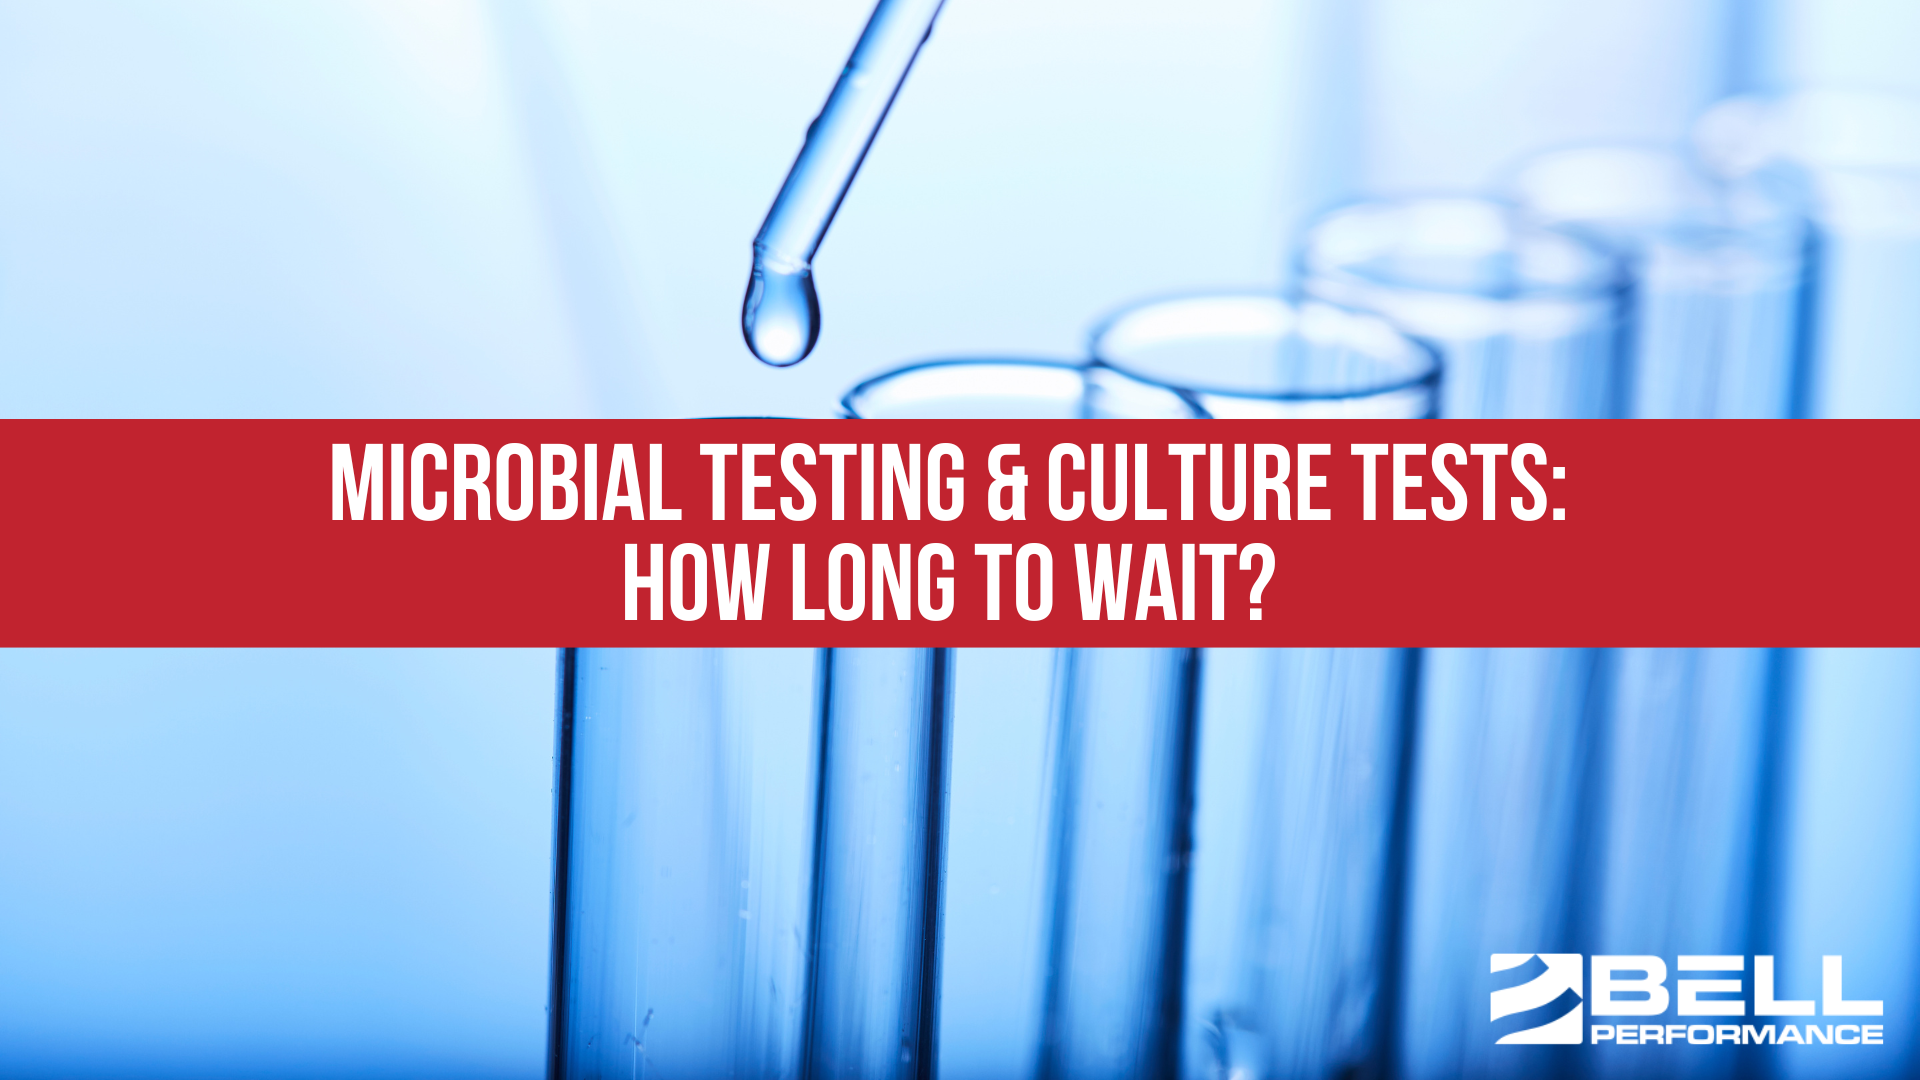 Microbial Testing & Culture Tests: How Long to Wait?